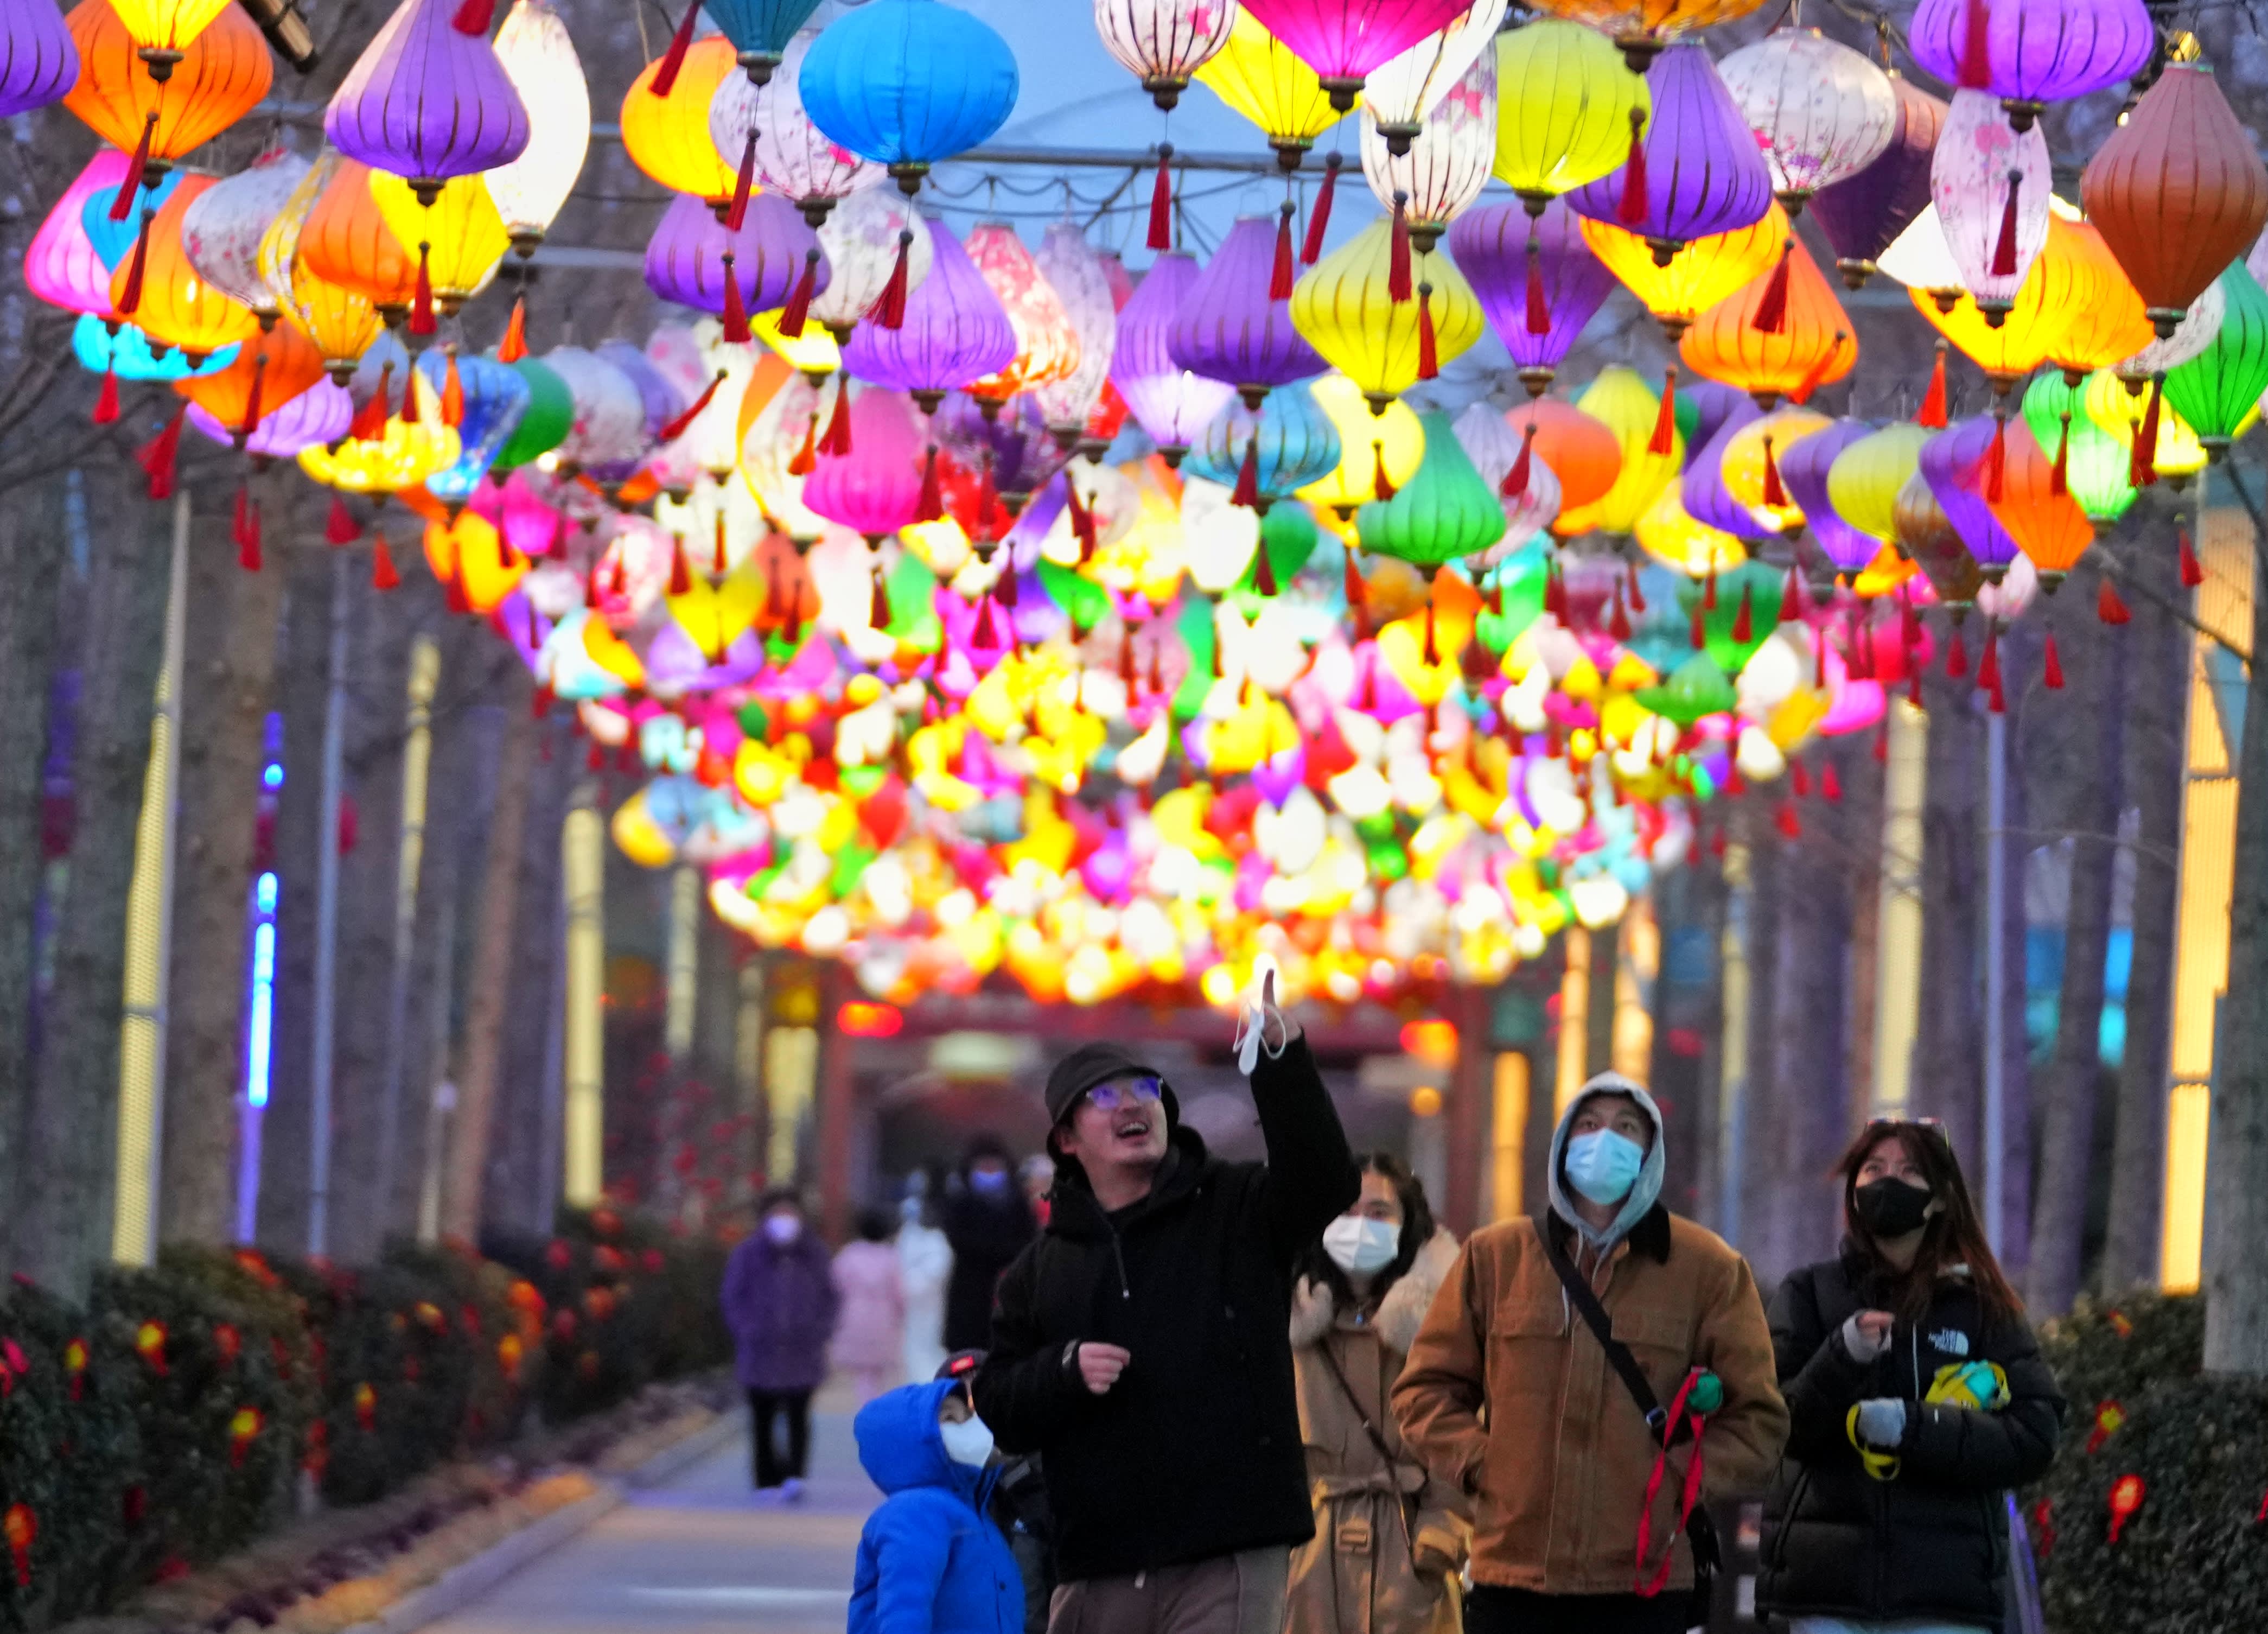 A 'huge pivot' in China is fueling the emerging markets boom, says Jan van Eck